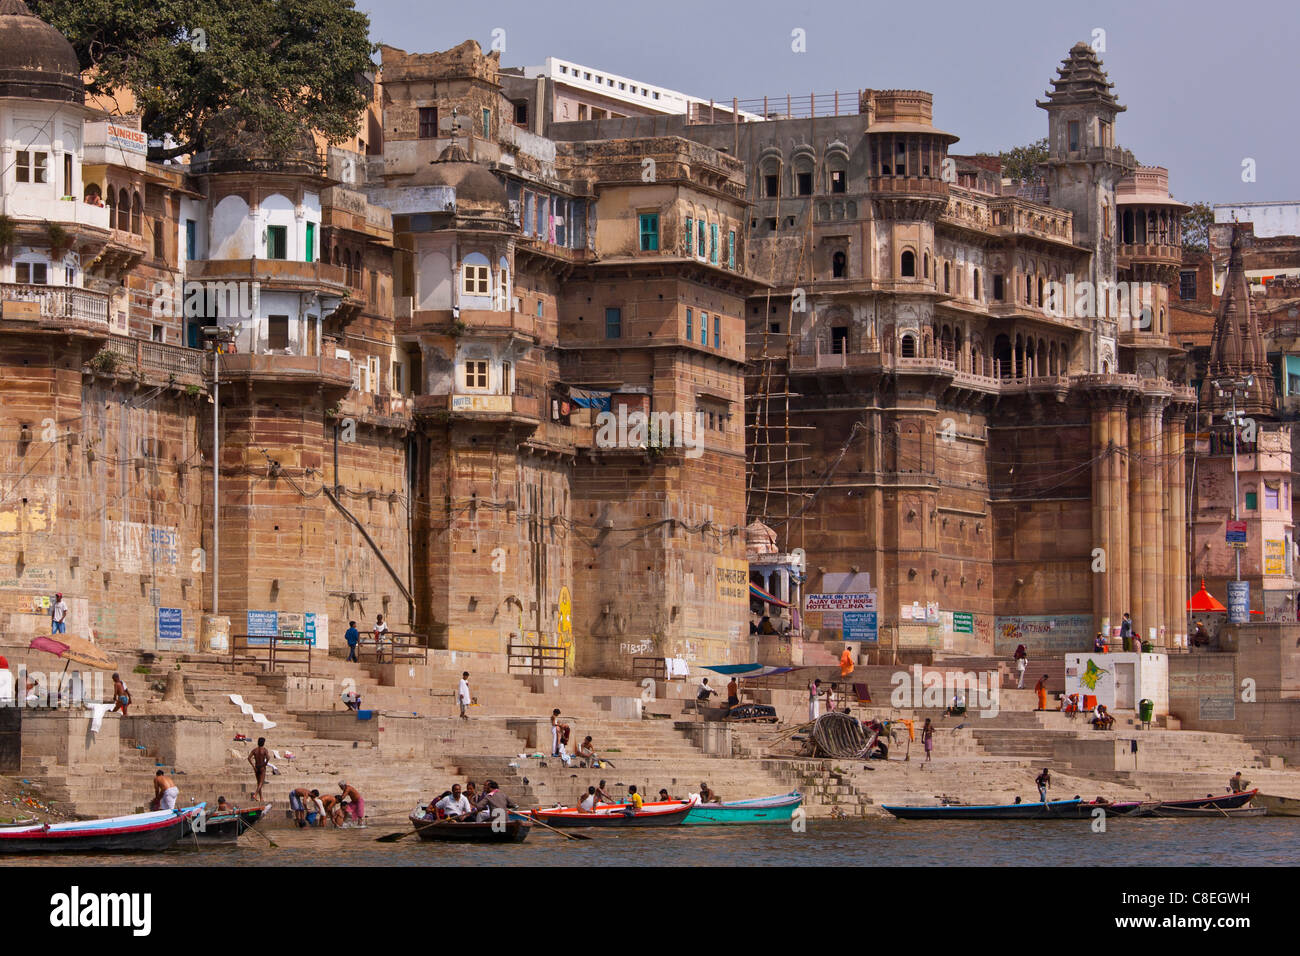 Rana Mahal Ghat on banks of The Ganges River in holy city of Varanasi, Northern India Stock Photo